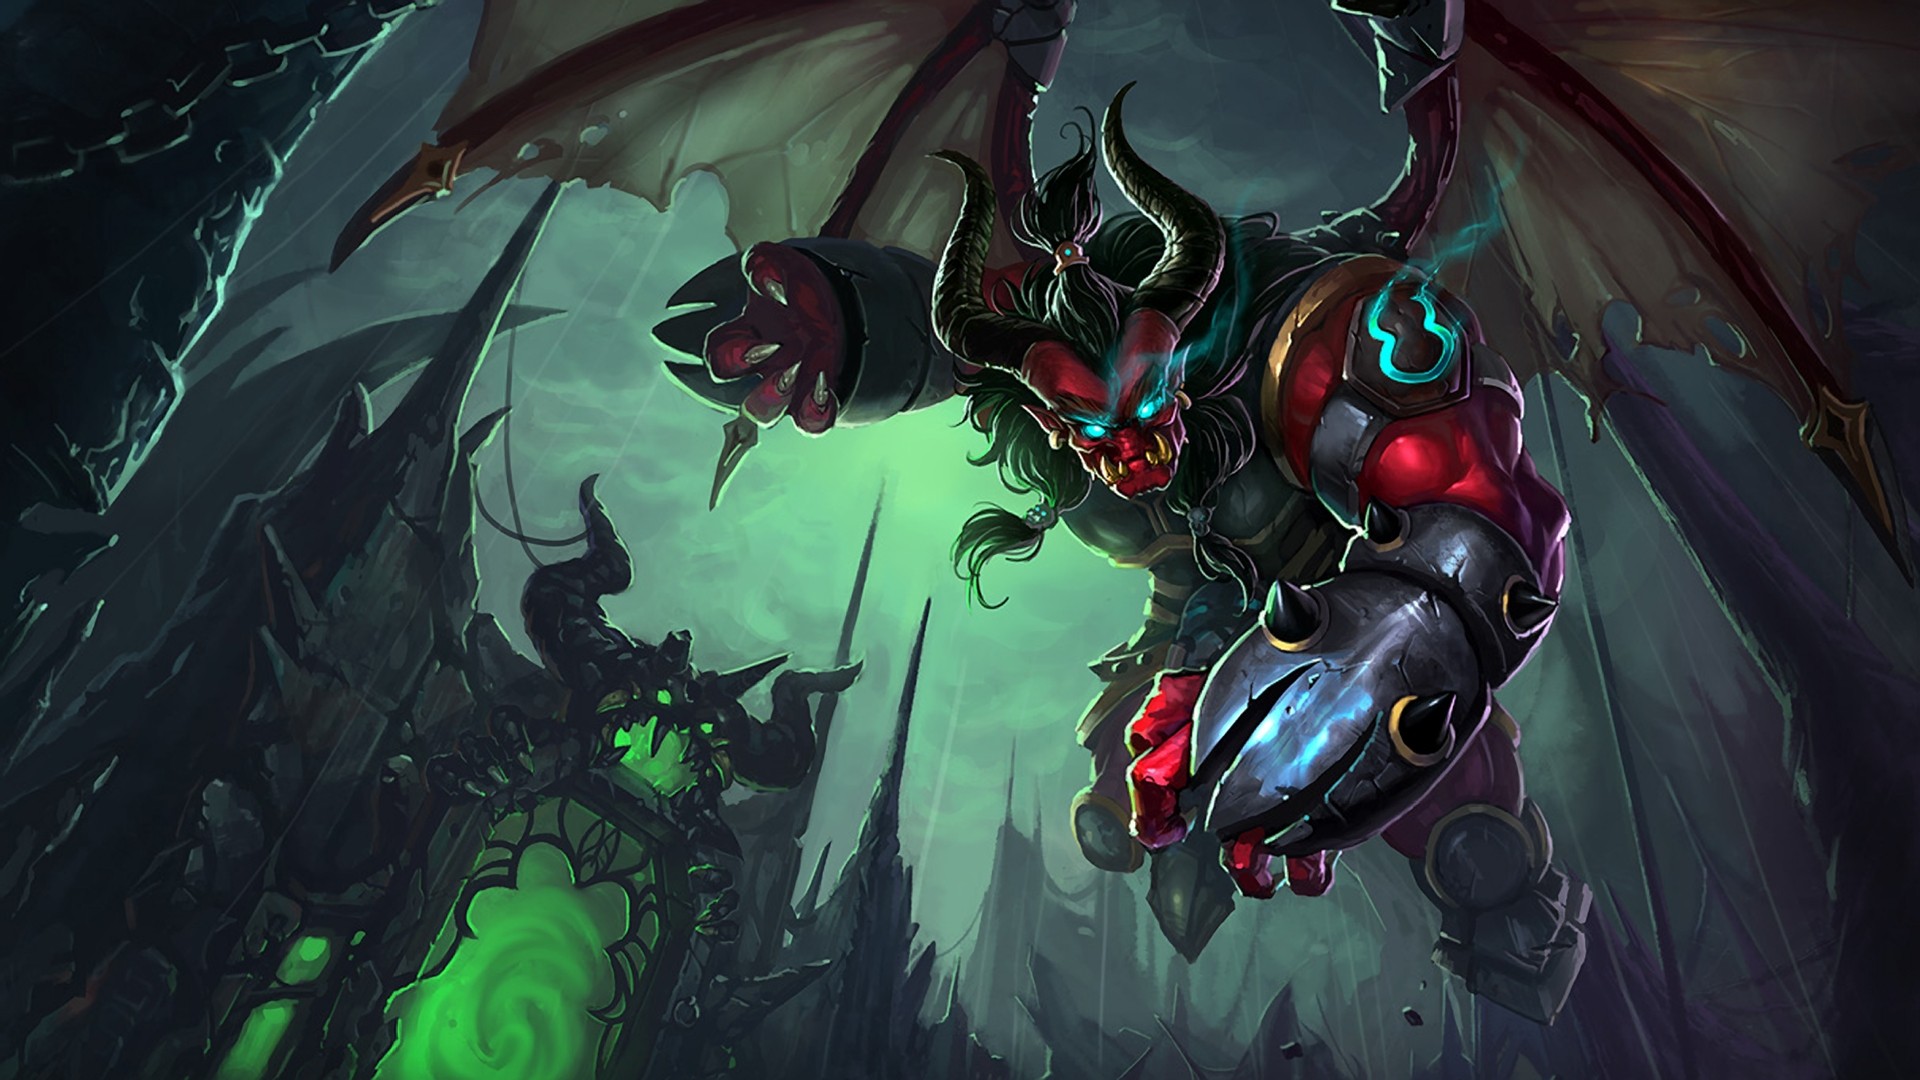 General 1920x1080 League of Legends PC gaming fantasy art horns glowing eyes demon wings Galio (League of Legends)